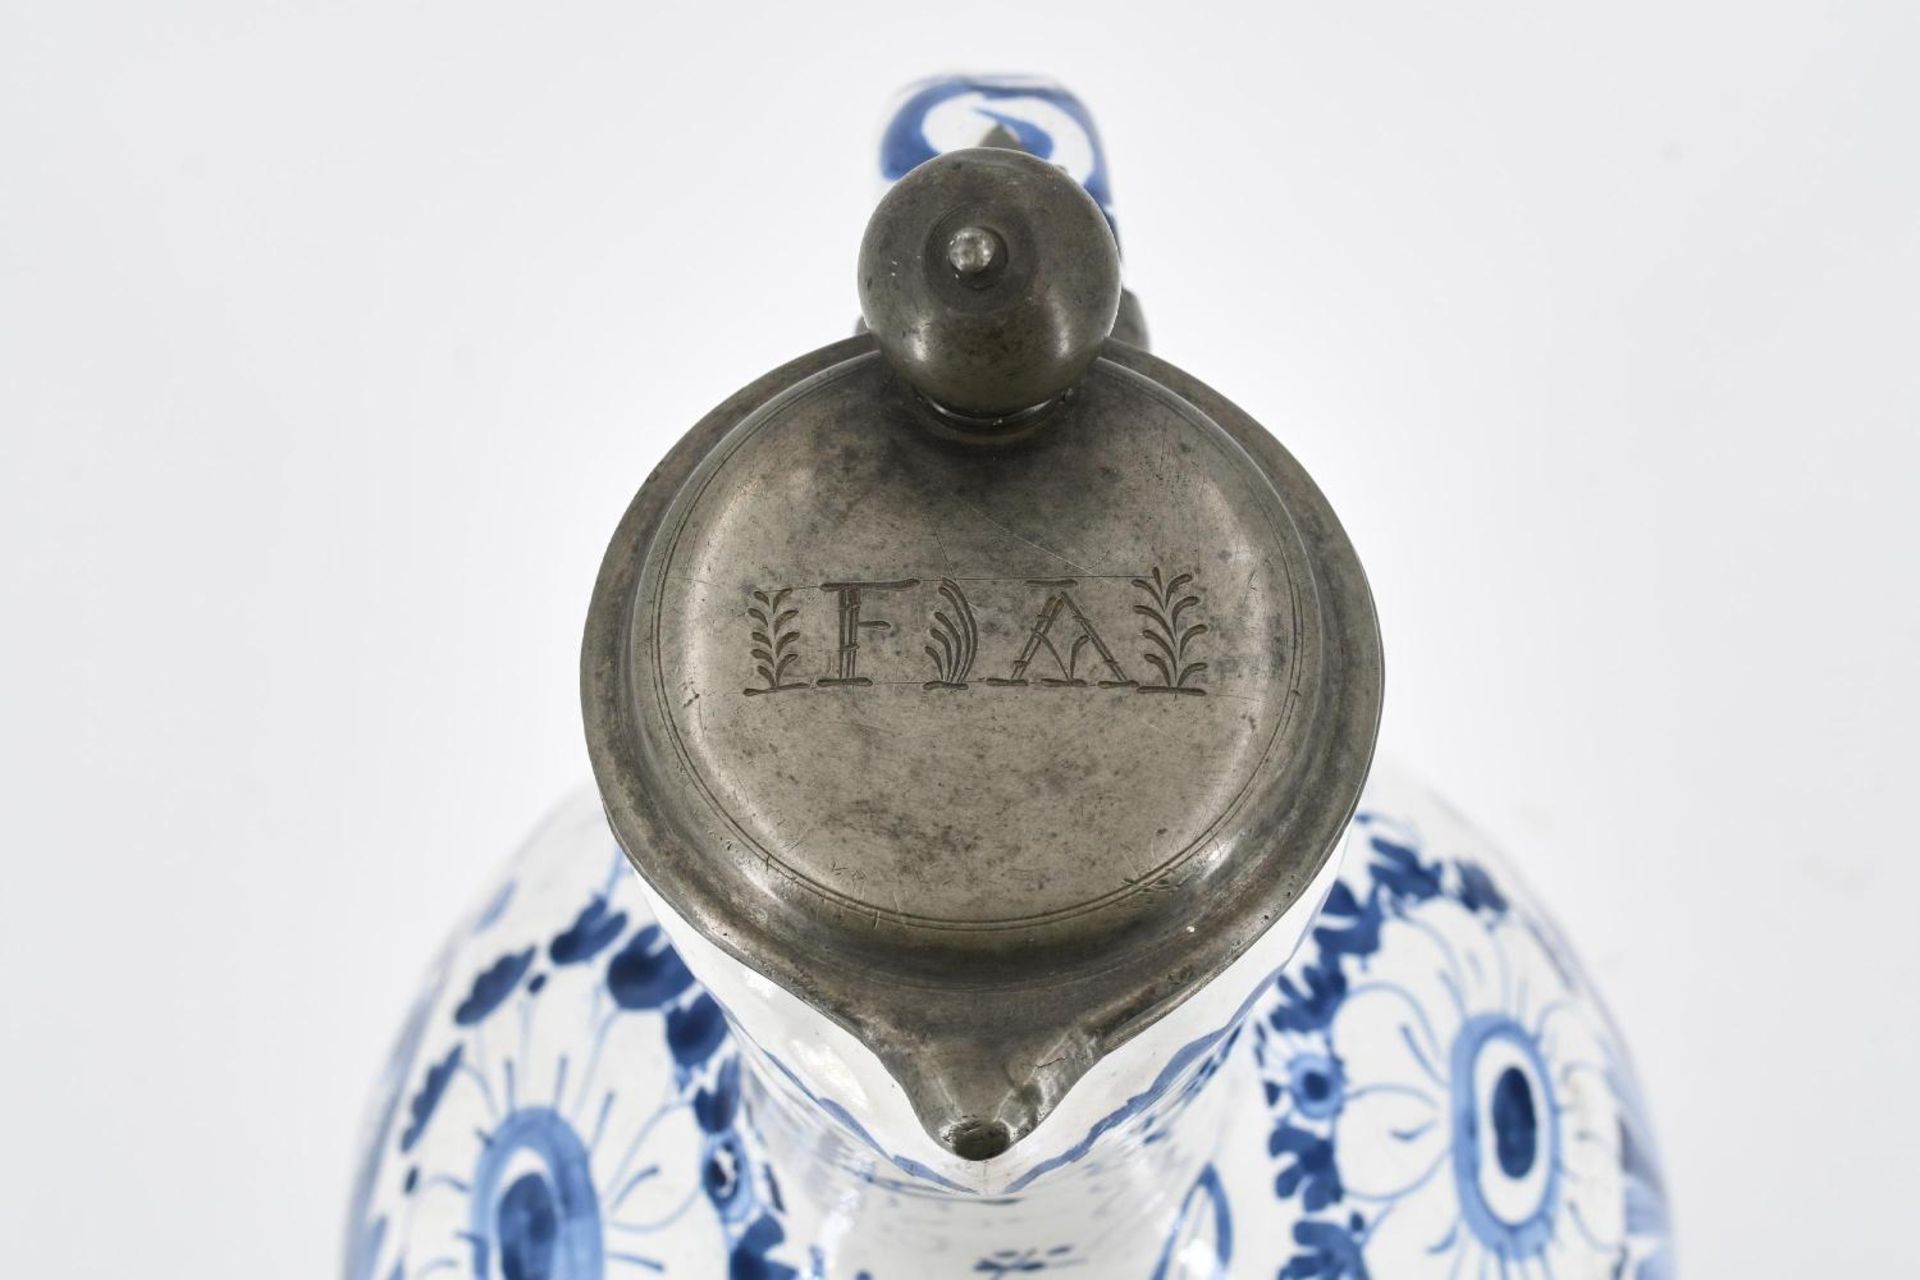 Narrow-Necked ceramic Jug with flower boquets and singing bird - Image 5 of 15